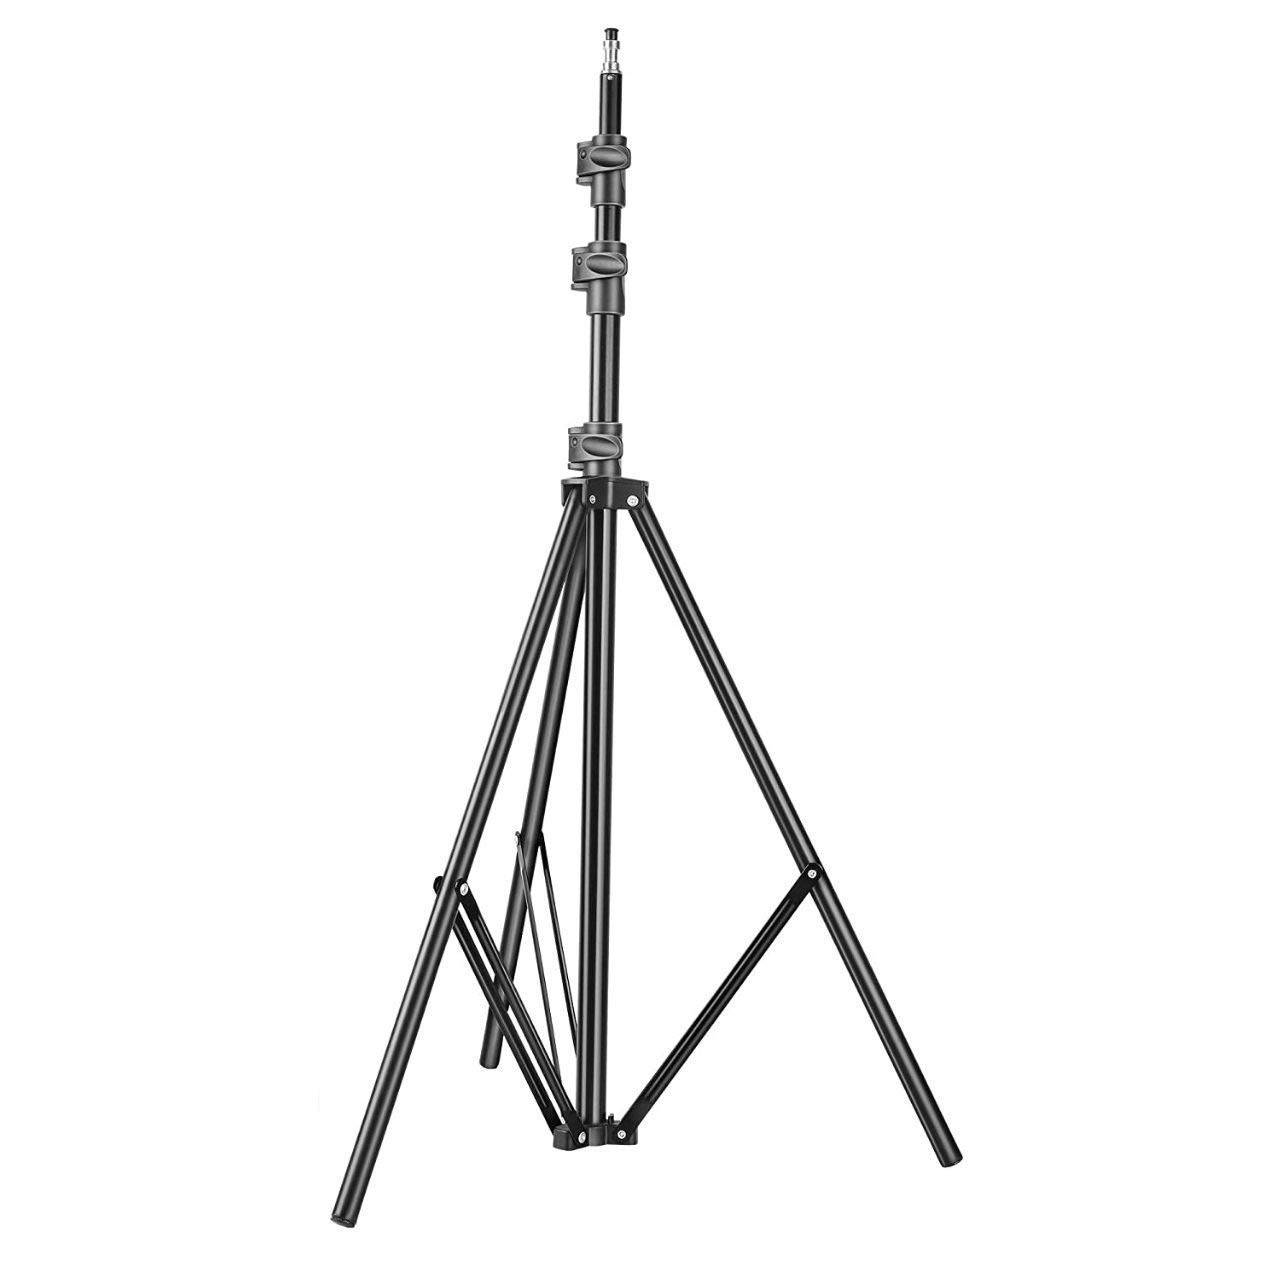 DIGITEKÂ® (DLS-9FT) Lightweight & Portable Aluminum Alloy Light Stand for Ring Light, Reflector, Flash Units, Diffuser, Portrait, Softbox, Studio Lighting & More Ideal for Outdoor & Indoor Shoots